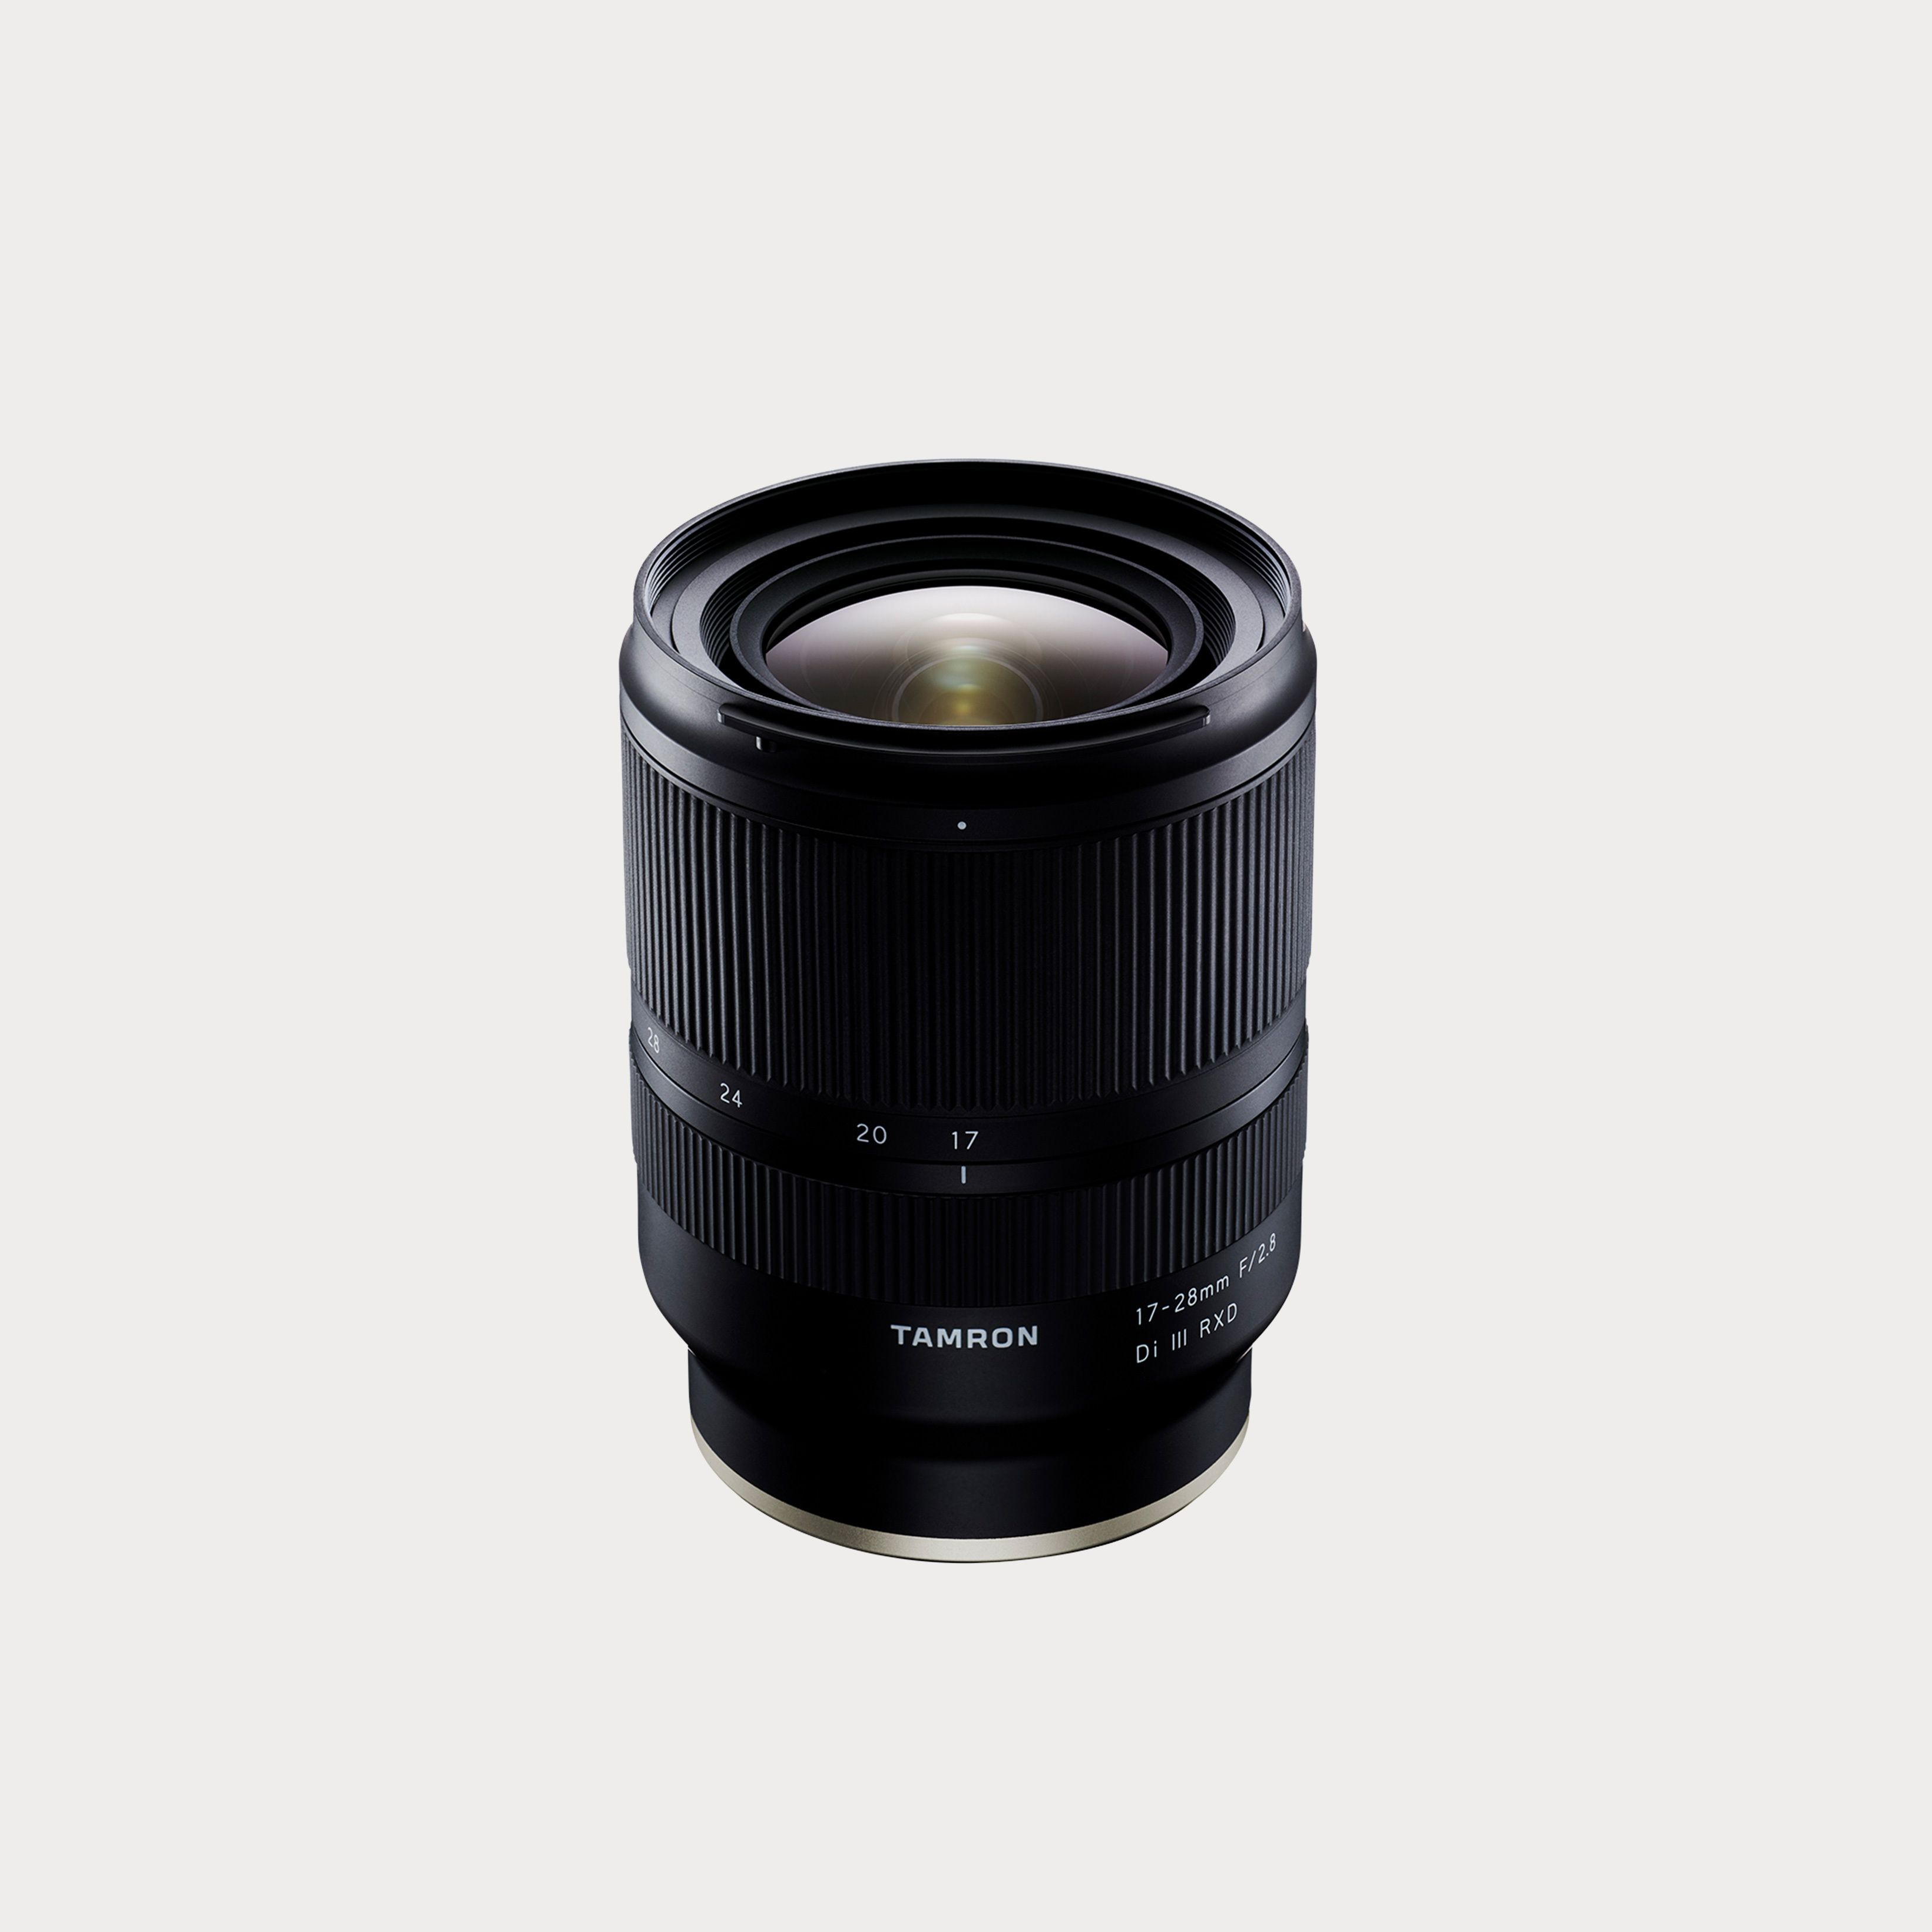 Tamron 28-200mm F/2.8-5.6 Di III RXD Lens - Sony E-Mount | Moment